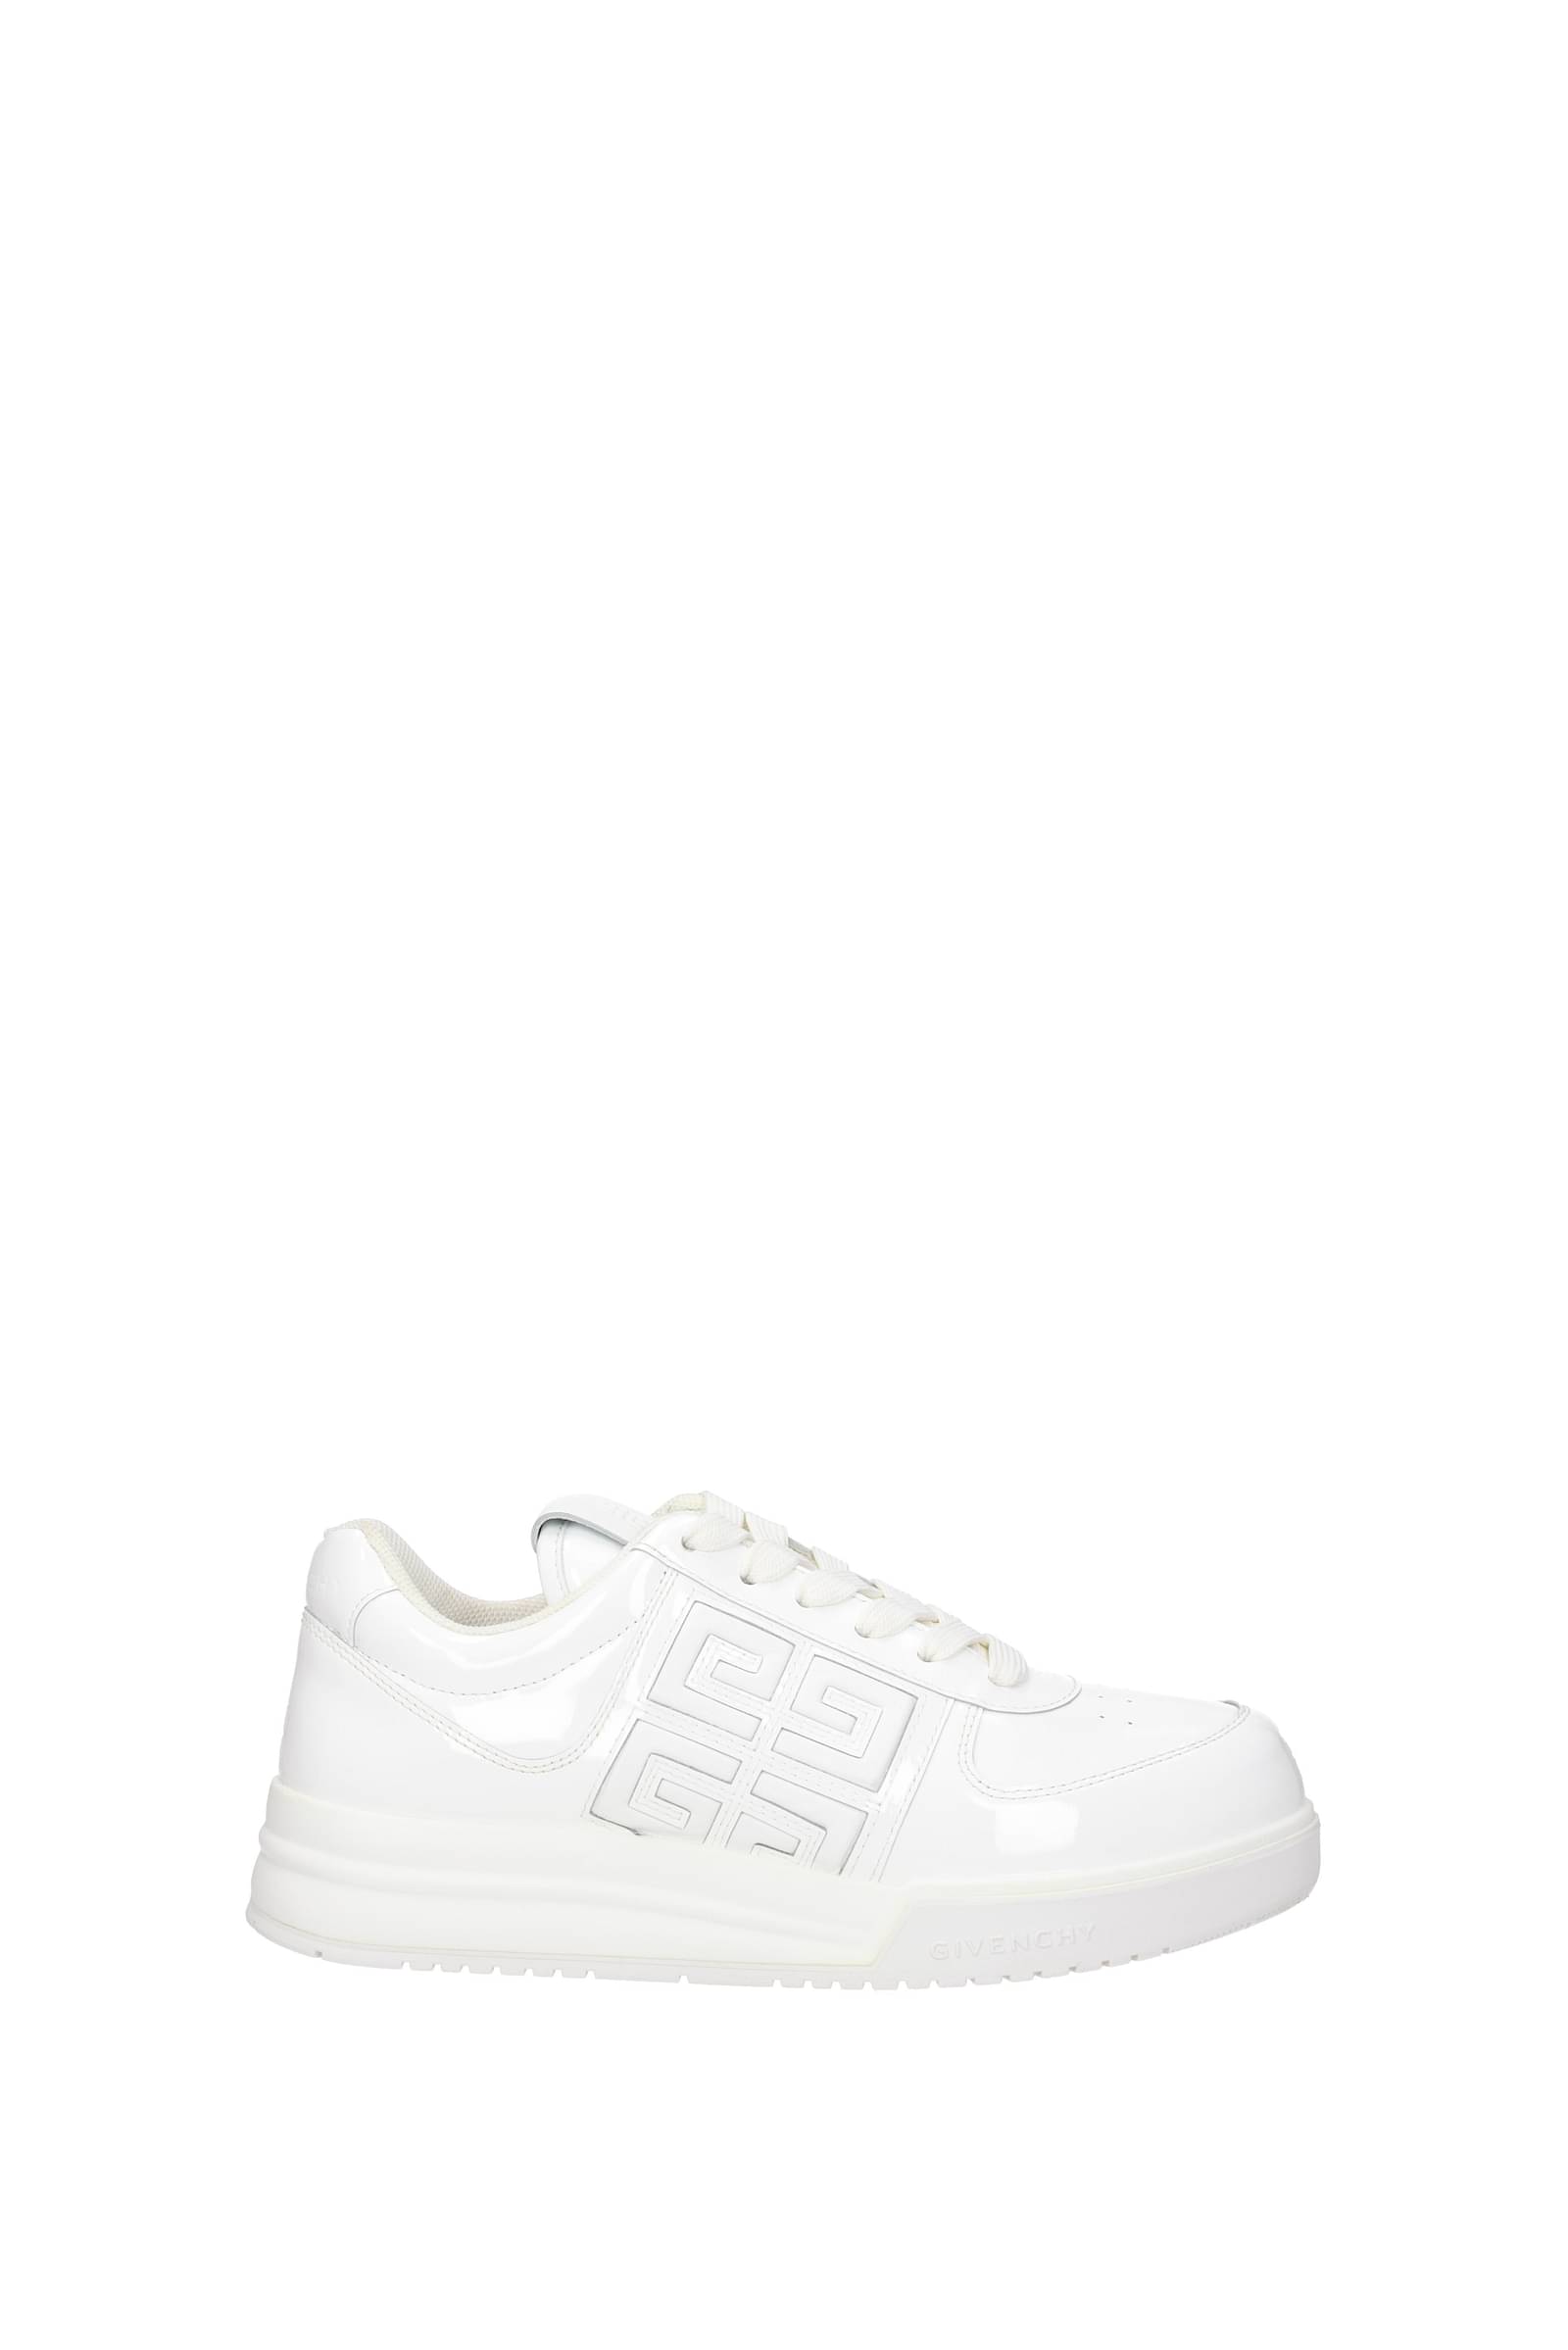 Share 182+ givenchy leather sneakers super hot